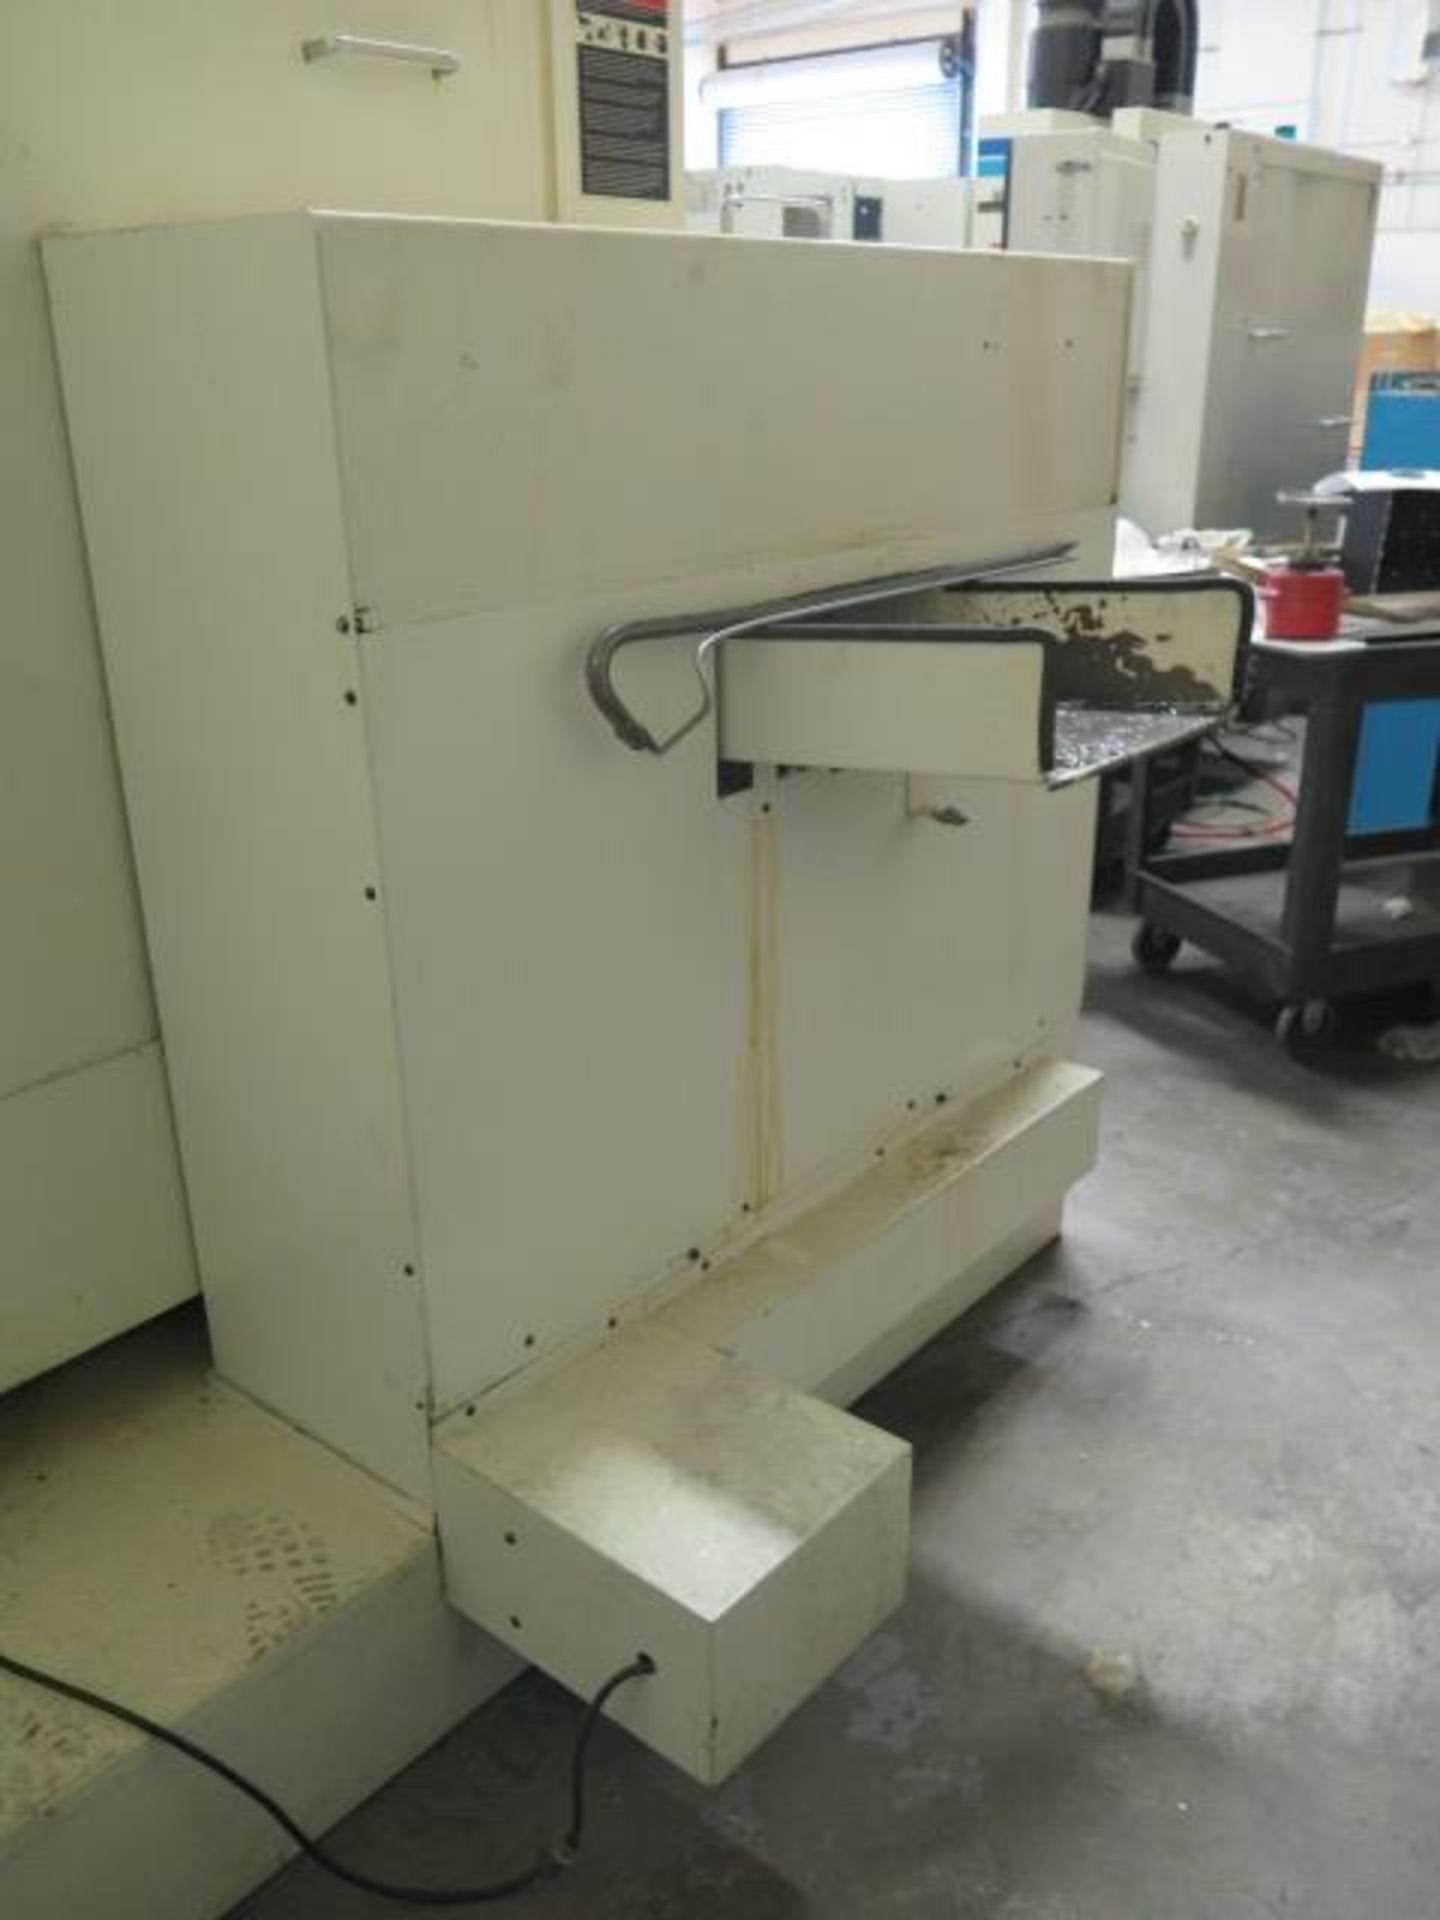 2003 Fadal VMC 4020HT CNC VMC s/n 032003095603 w/ Fadal CNC32MP Controls, SOLD AS IS - Image 15 of 18